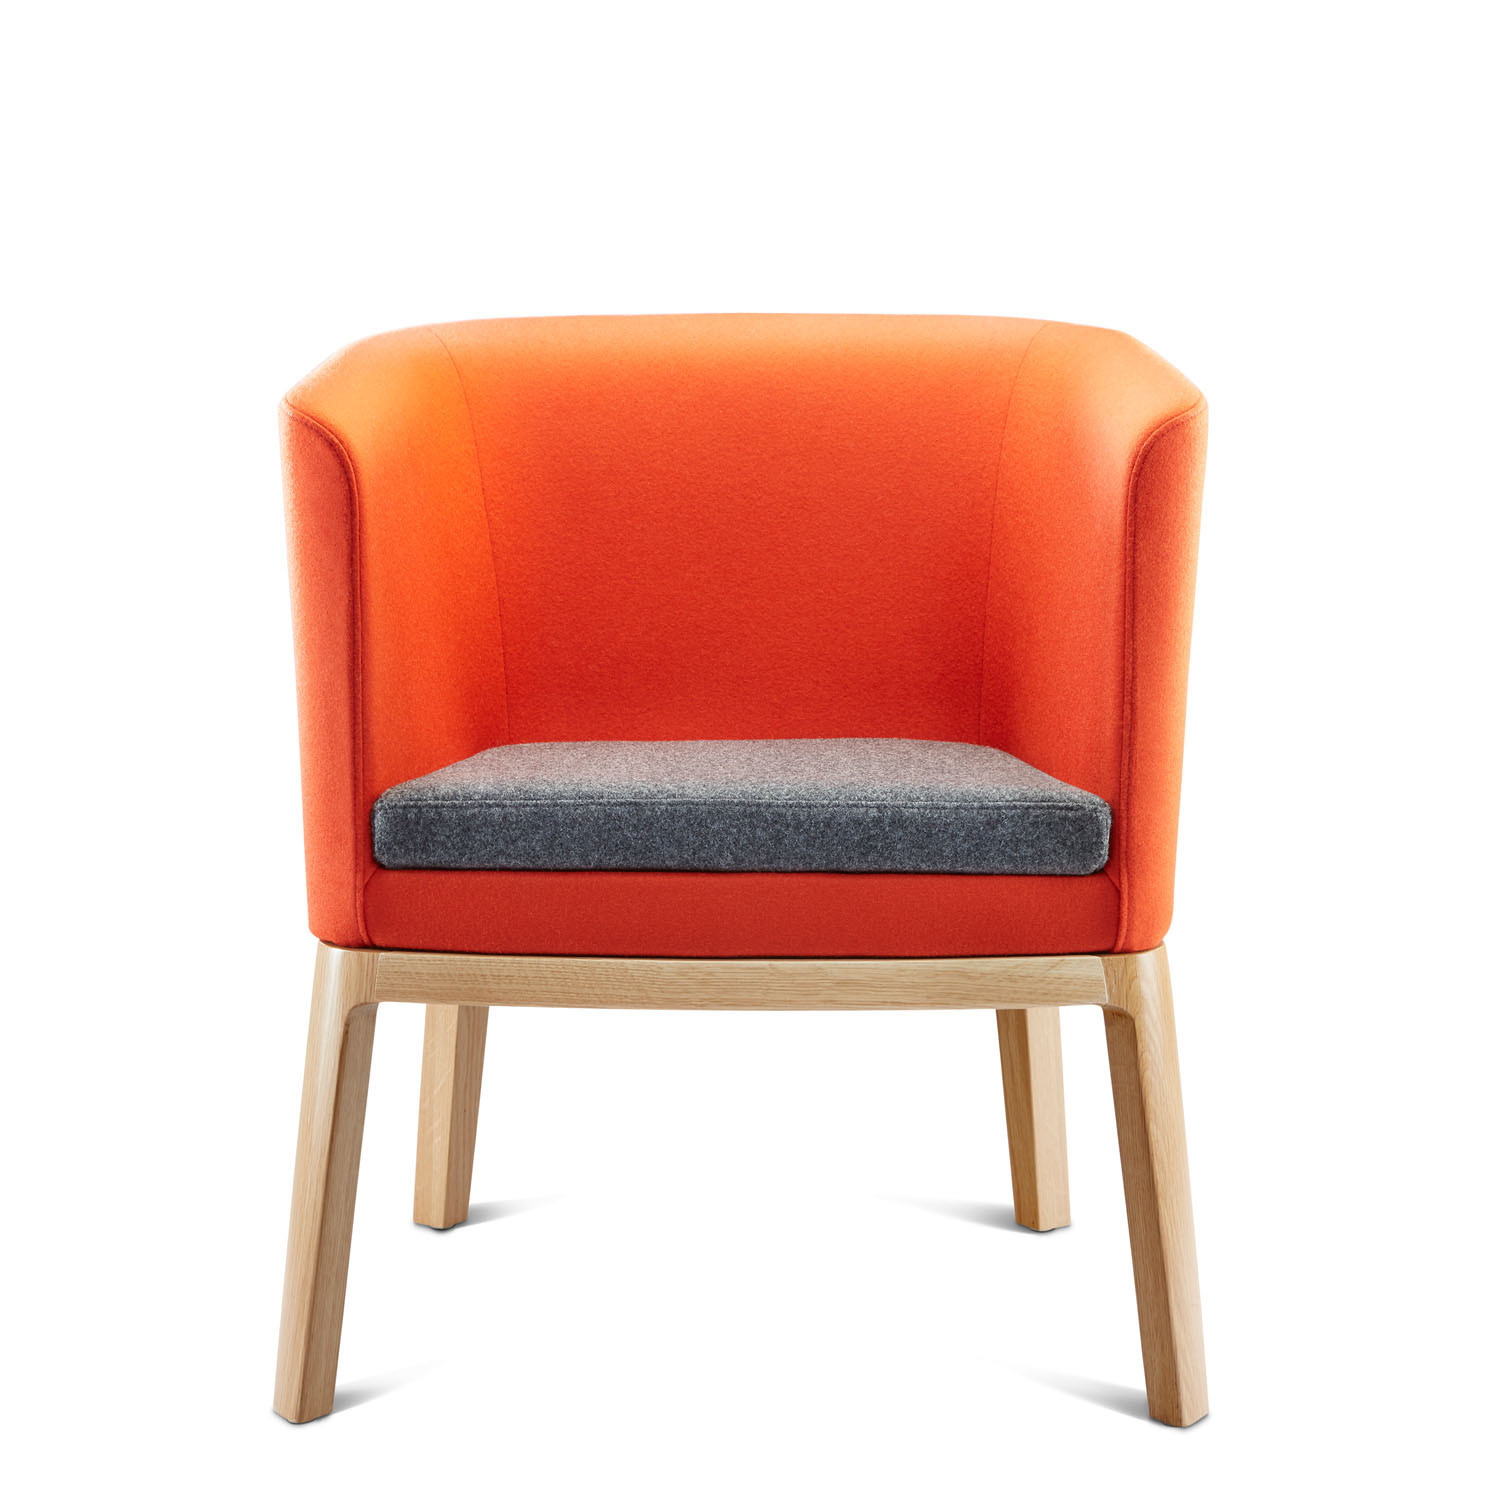 Crown Chair from Roger Webb Associates